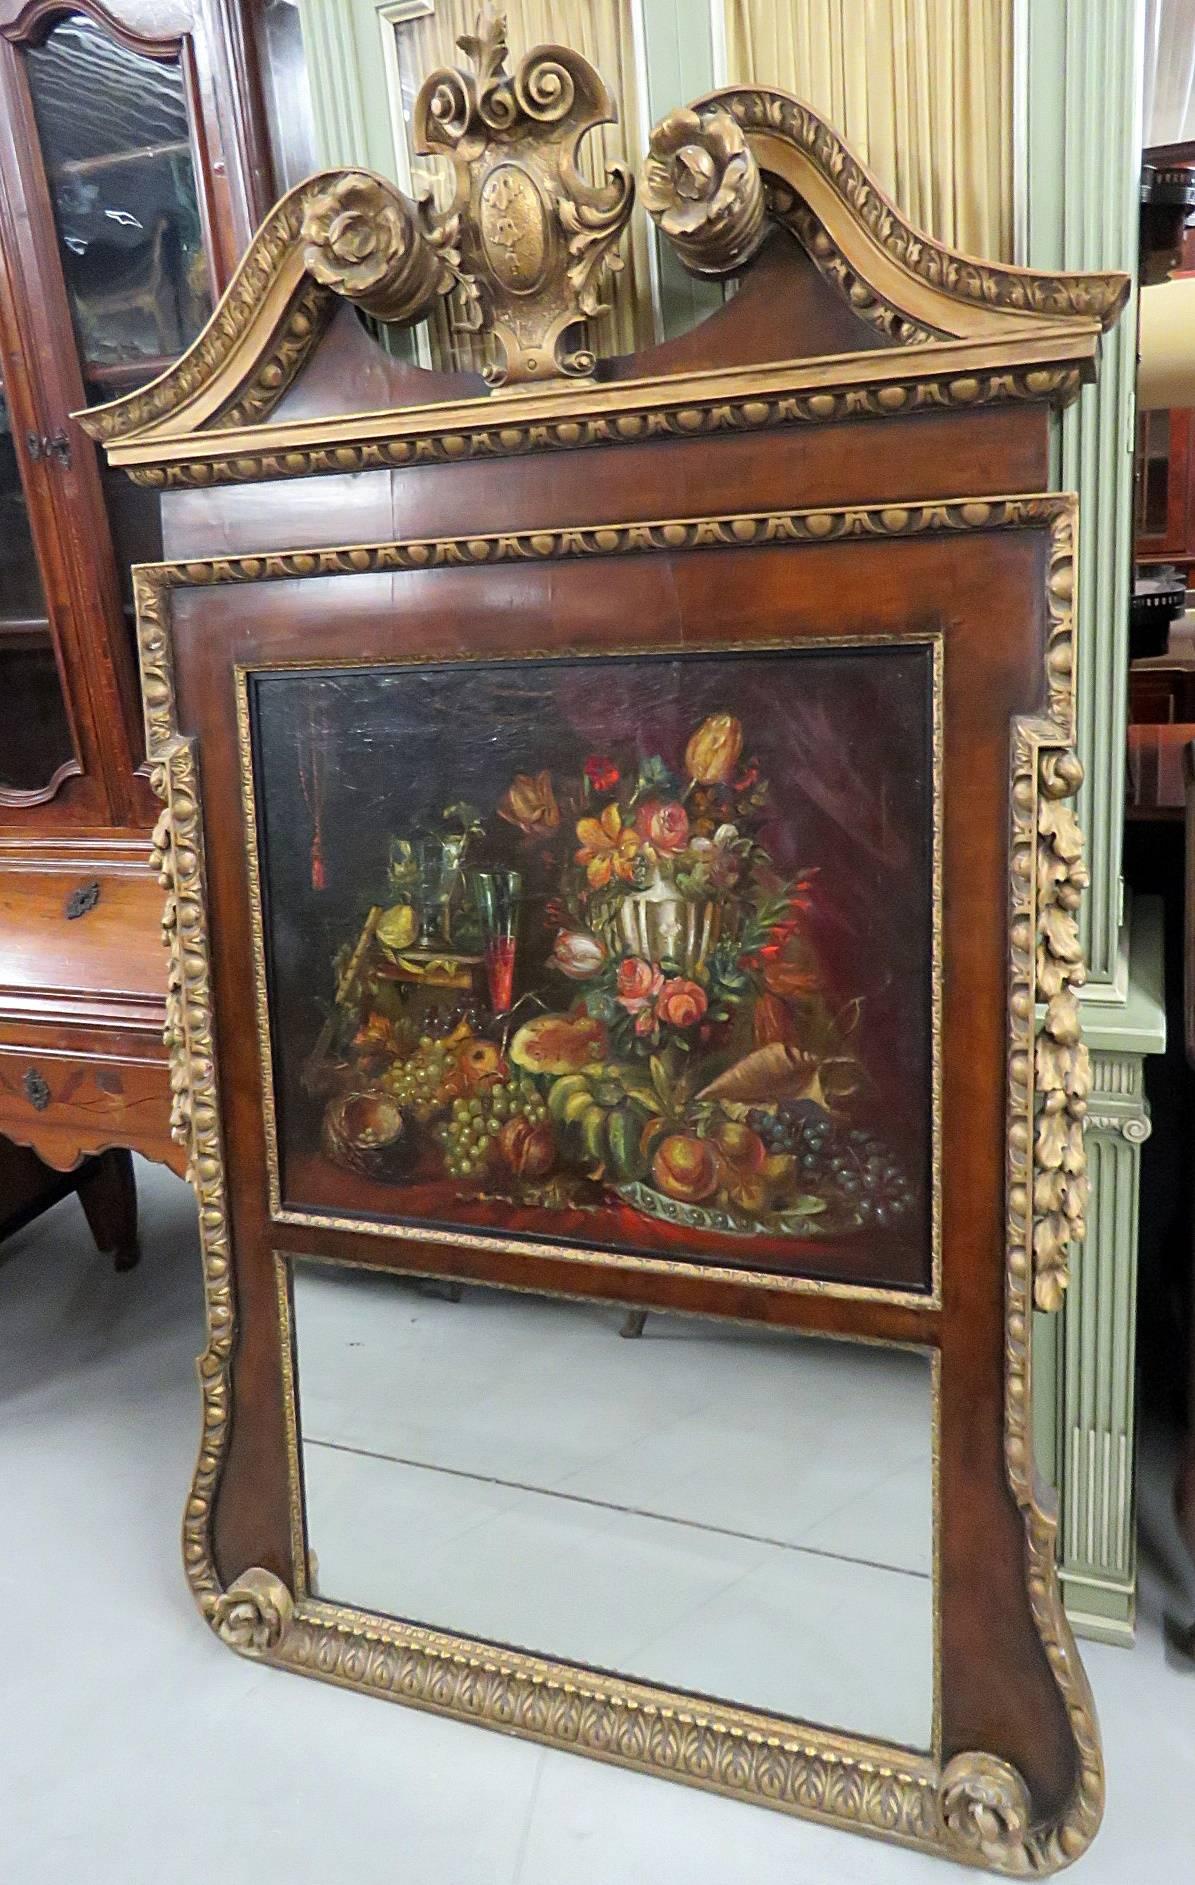 18th century Georgian style trumeau mirror with an oil painting over the mirror and a gilt decorated carved wood frame. The oil painting is 24